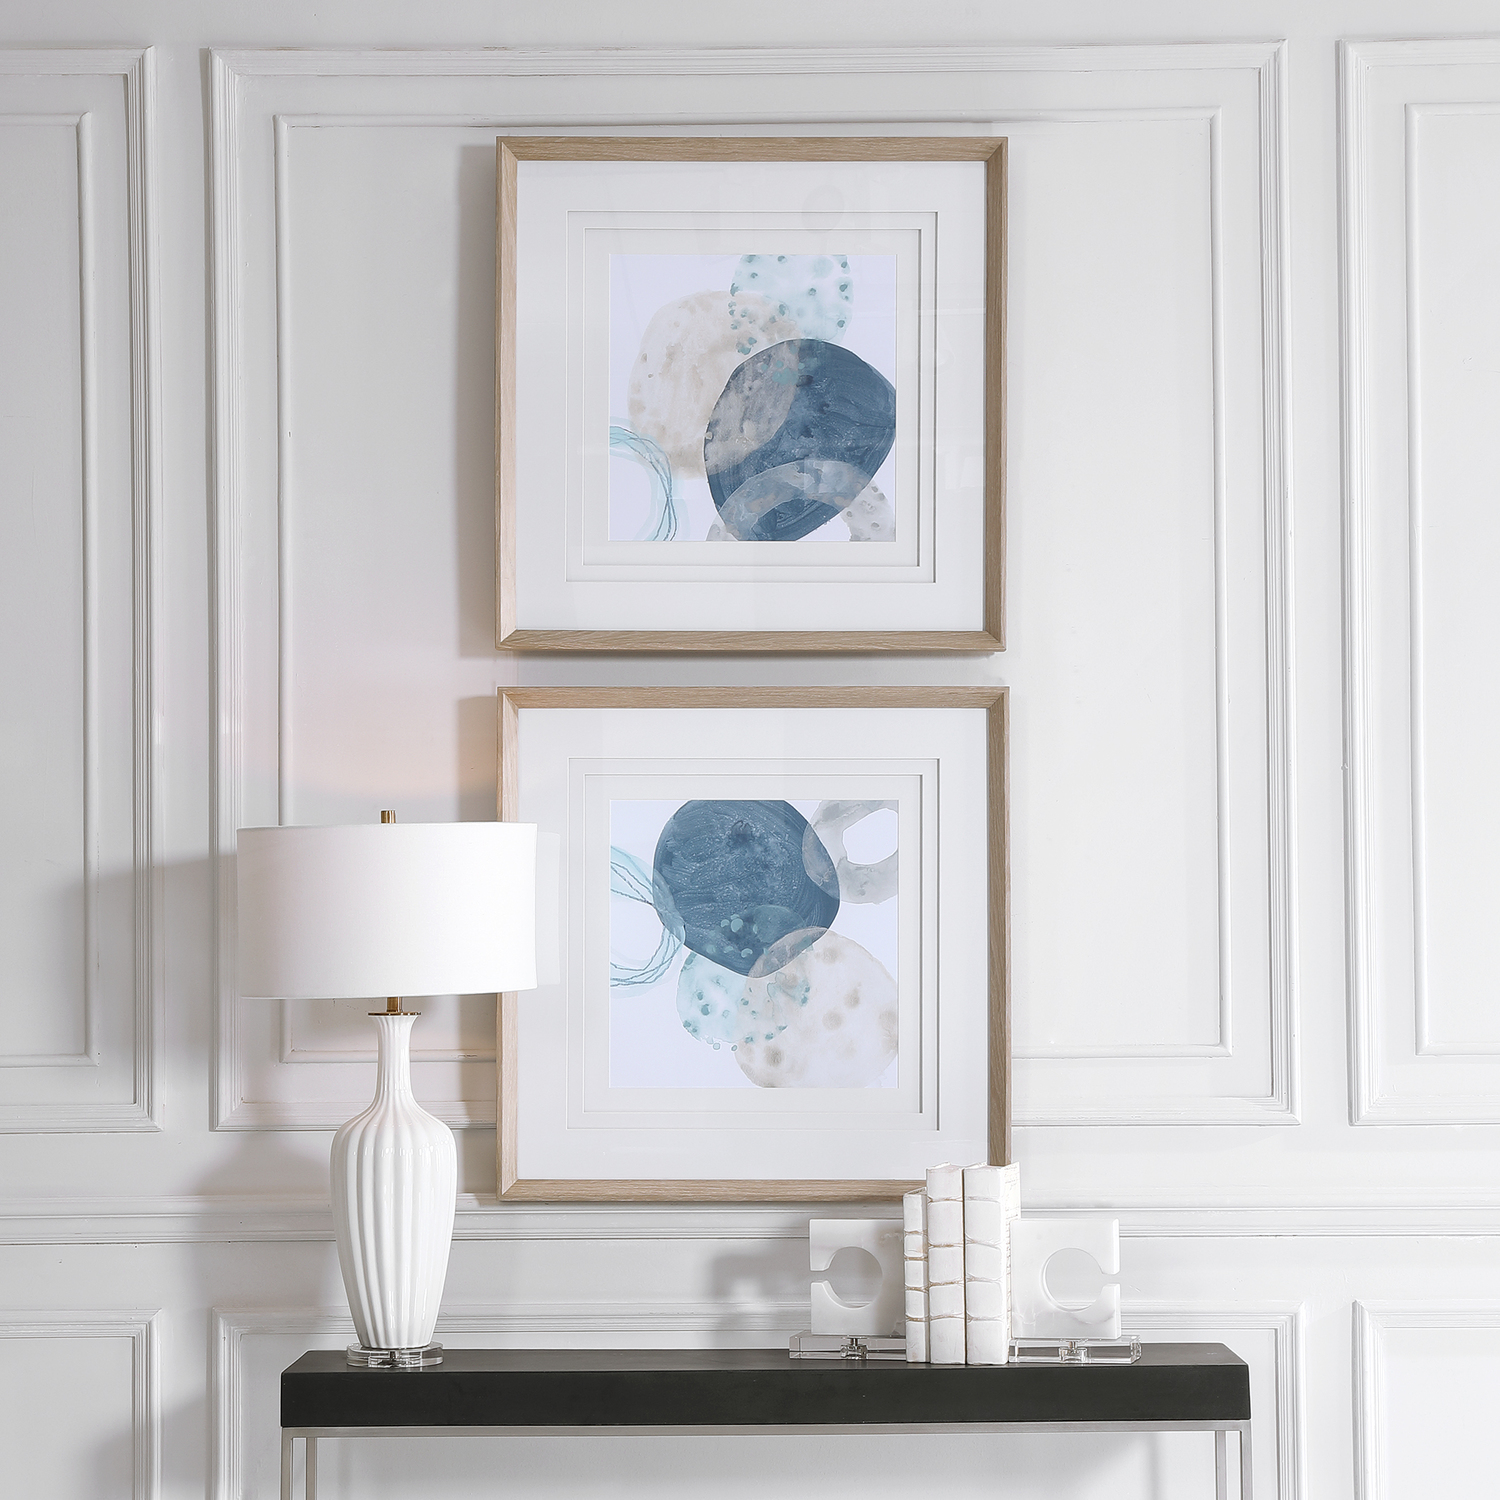 photos to hang on wall Uttermost Floral Prints Taupe, Gray-blue, Aqua, Gray, White, Abstracts, Triple White Matting With Spacers, Wood Frame